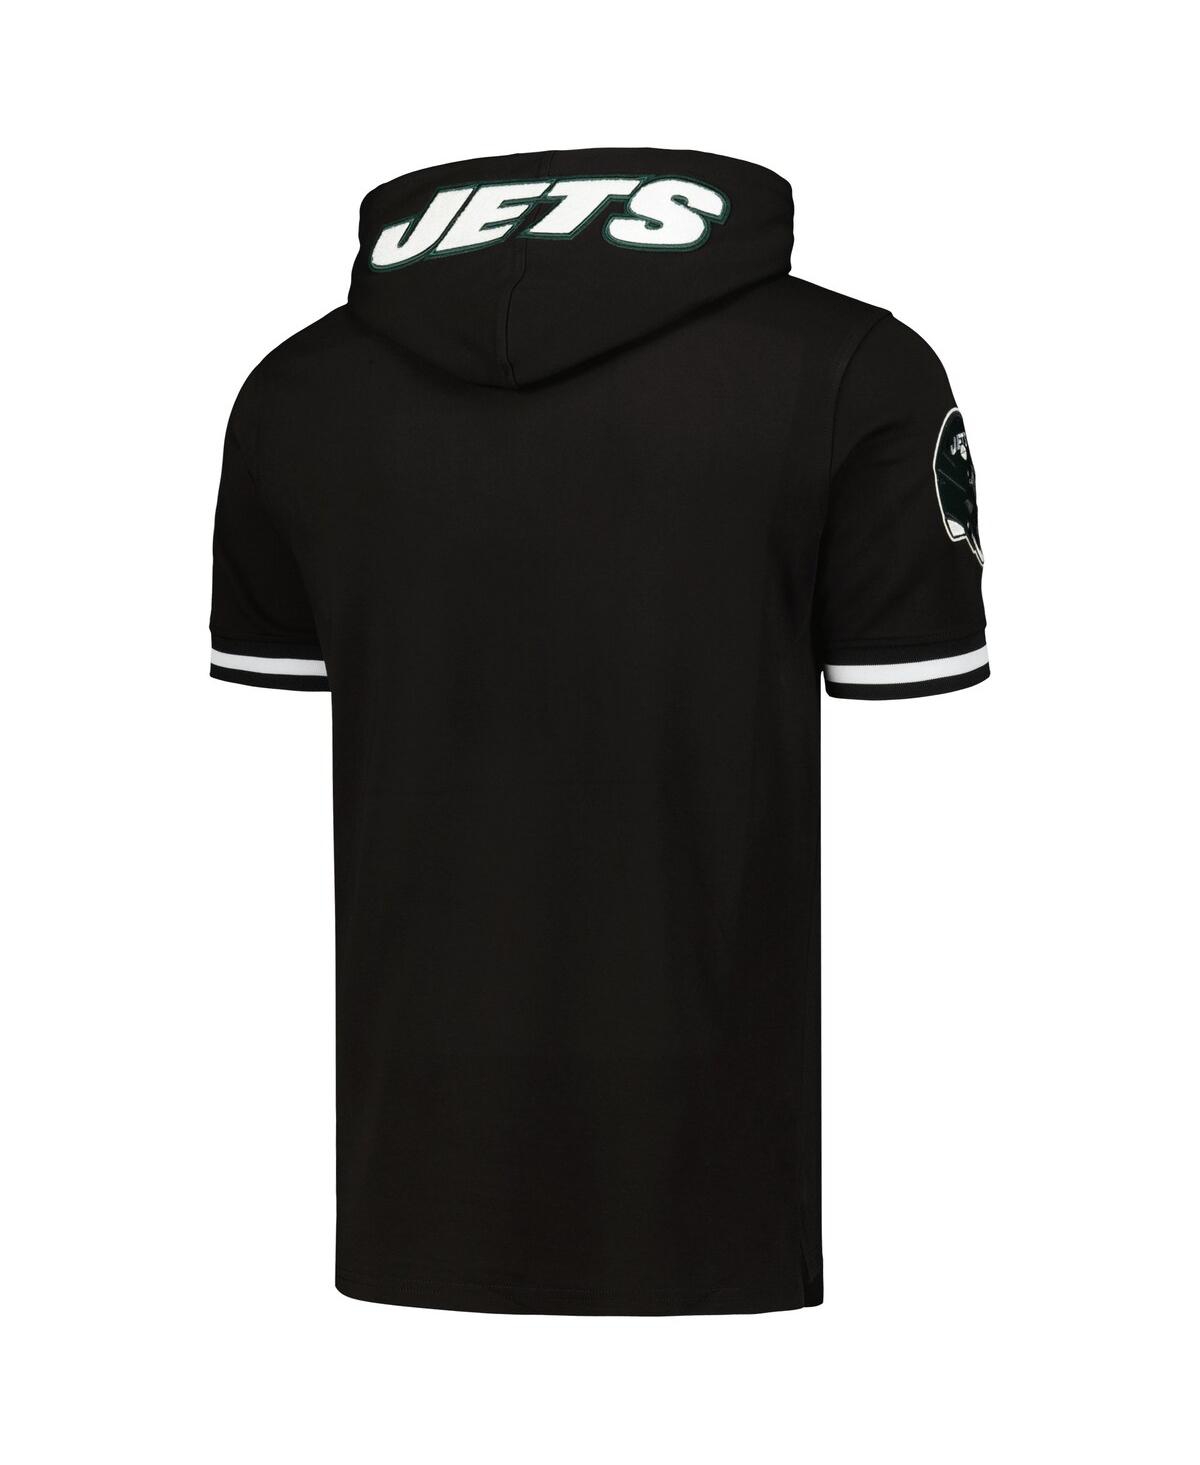 Shop Pro Standard Men's  Aaron Rodgers Black New York Jets Player Name And Number Hoodie T-shirt